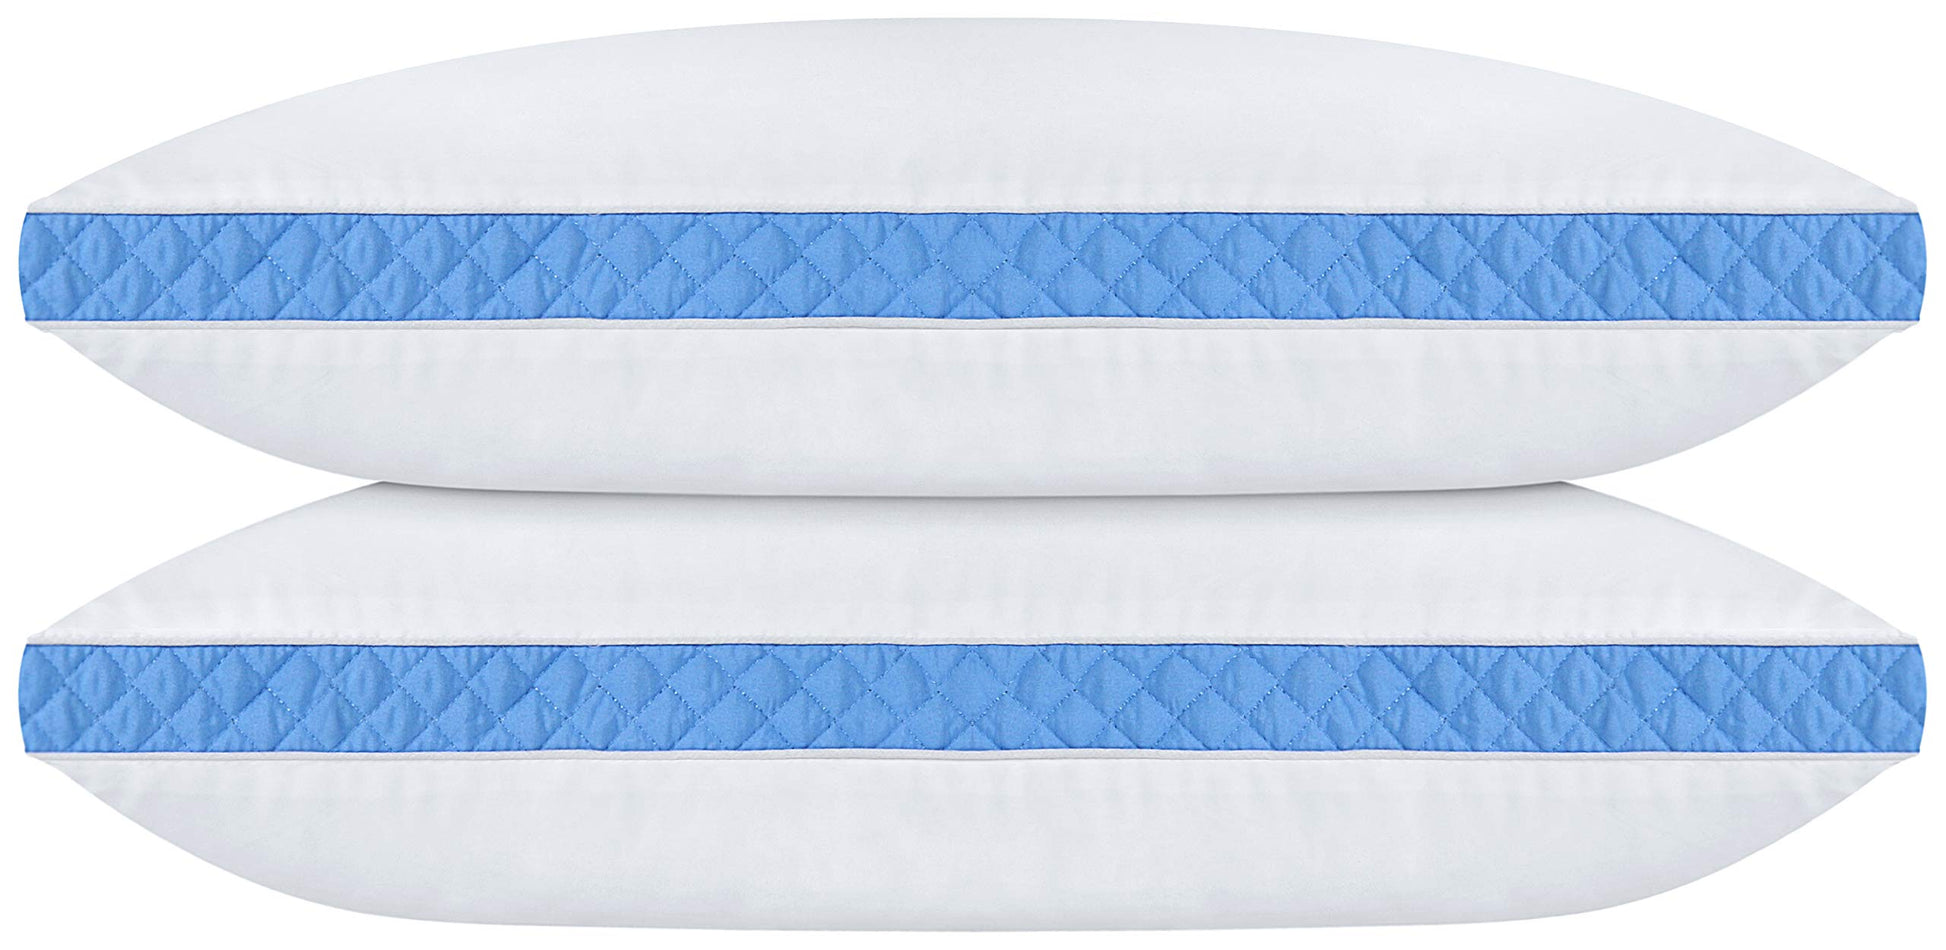 Utopia Bedding Gusseted Pillow (2-Pack)